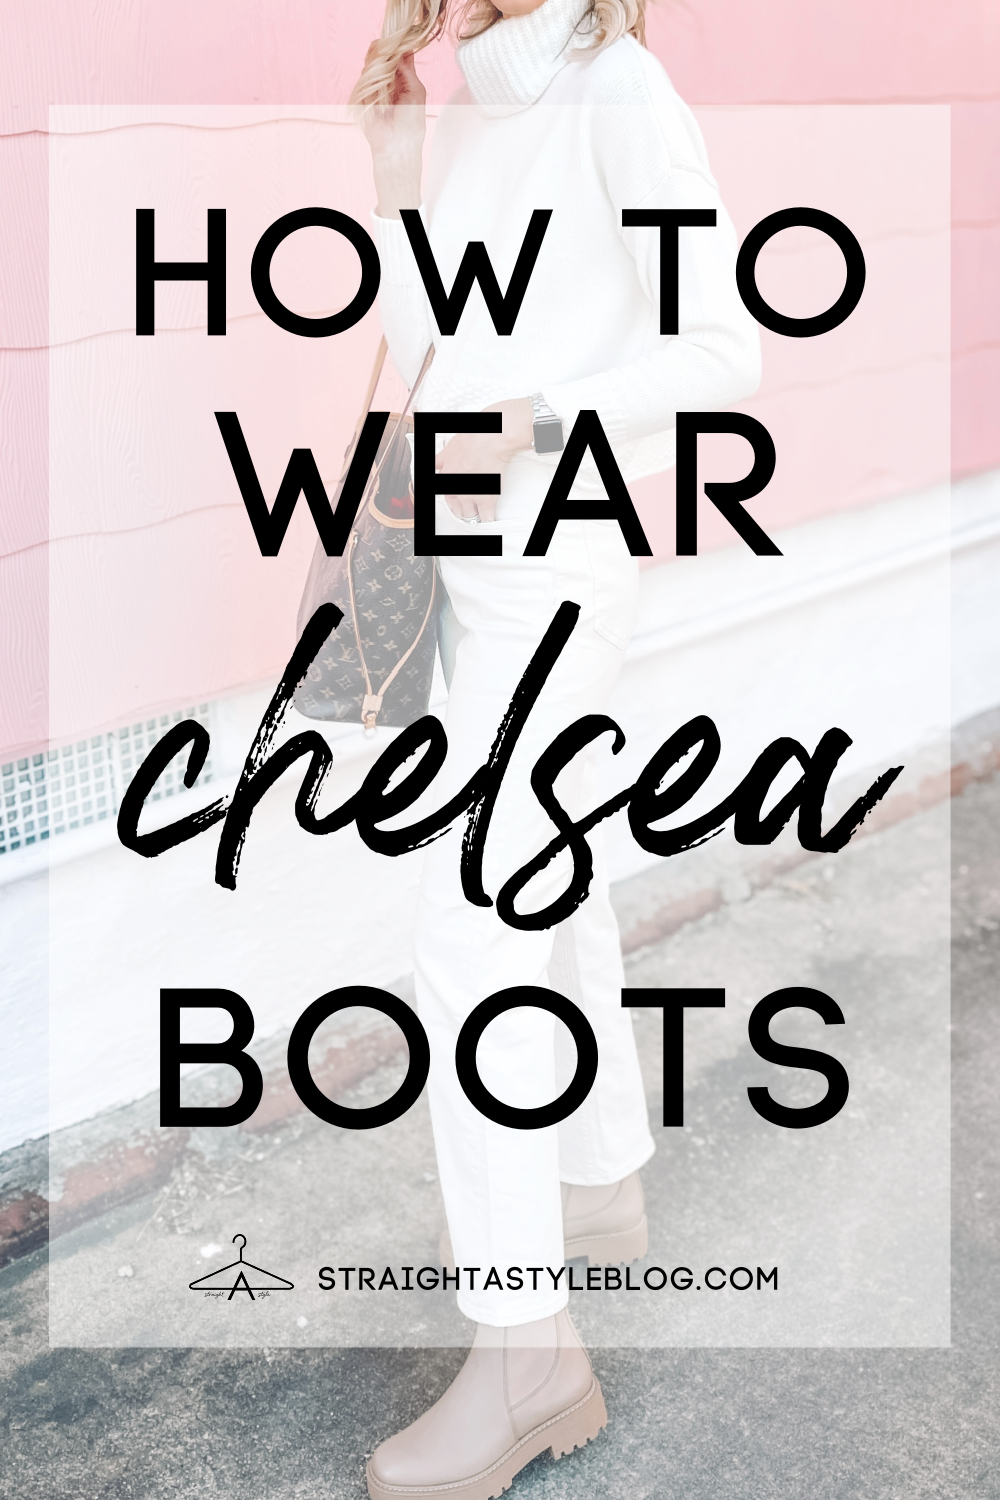 The 7 Types of Boots Every Woman Should Have In Her Wardrobe